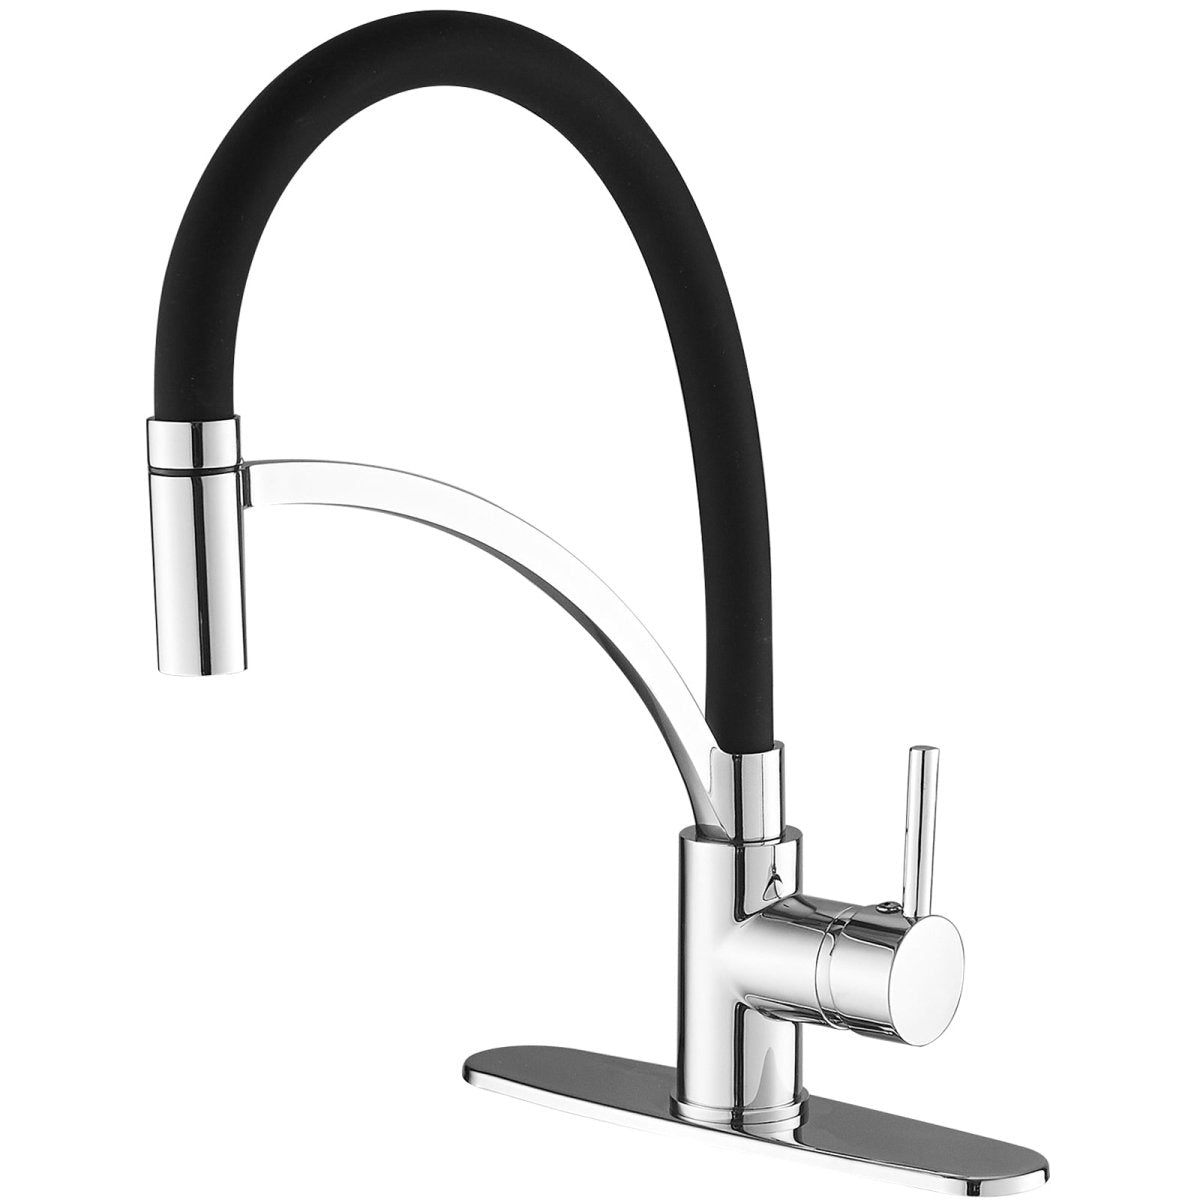 Single Handle Kitchen Faucet with Pull Down Sprayer Chrome - buyfaucet.com